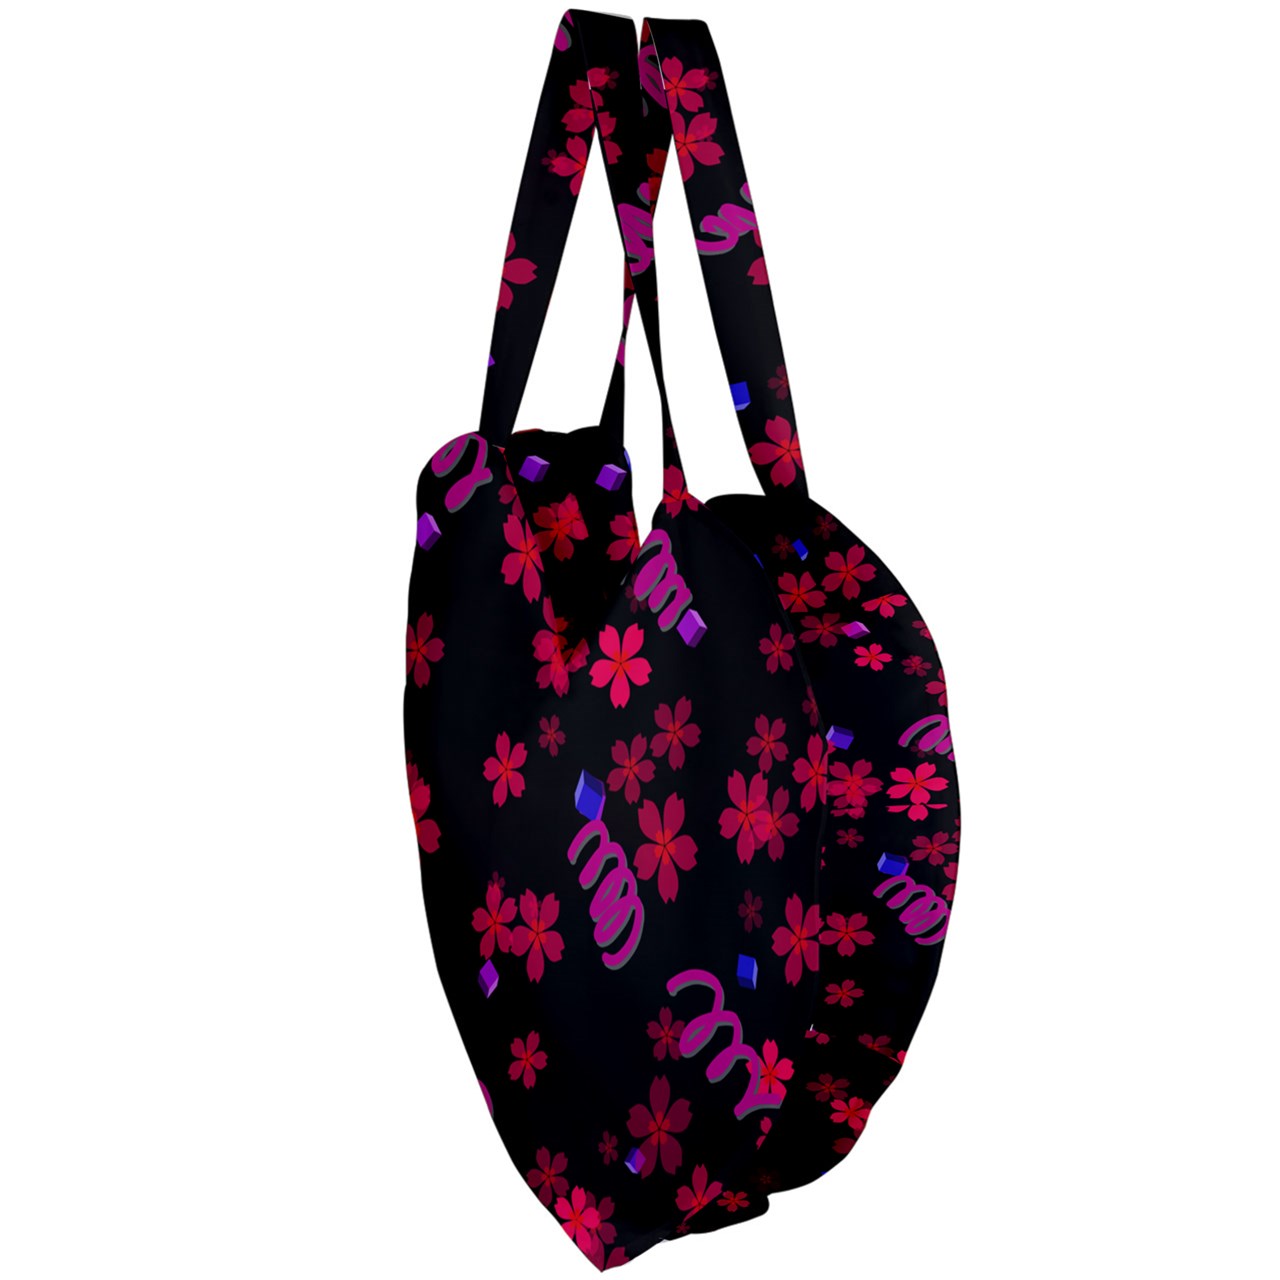 springed flowers Giant Heart Shaped Tote